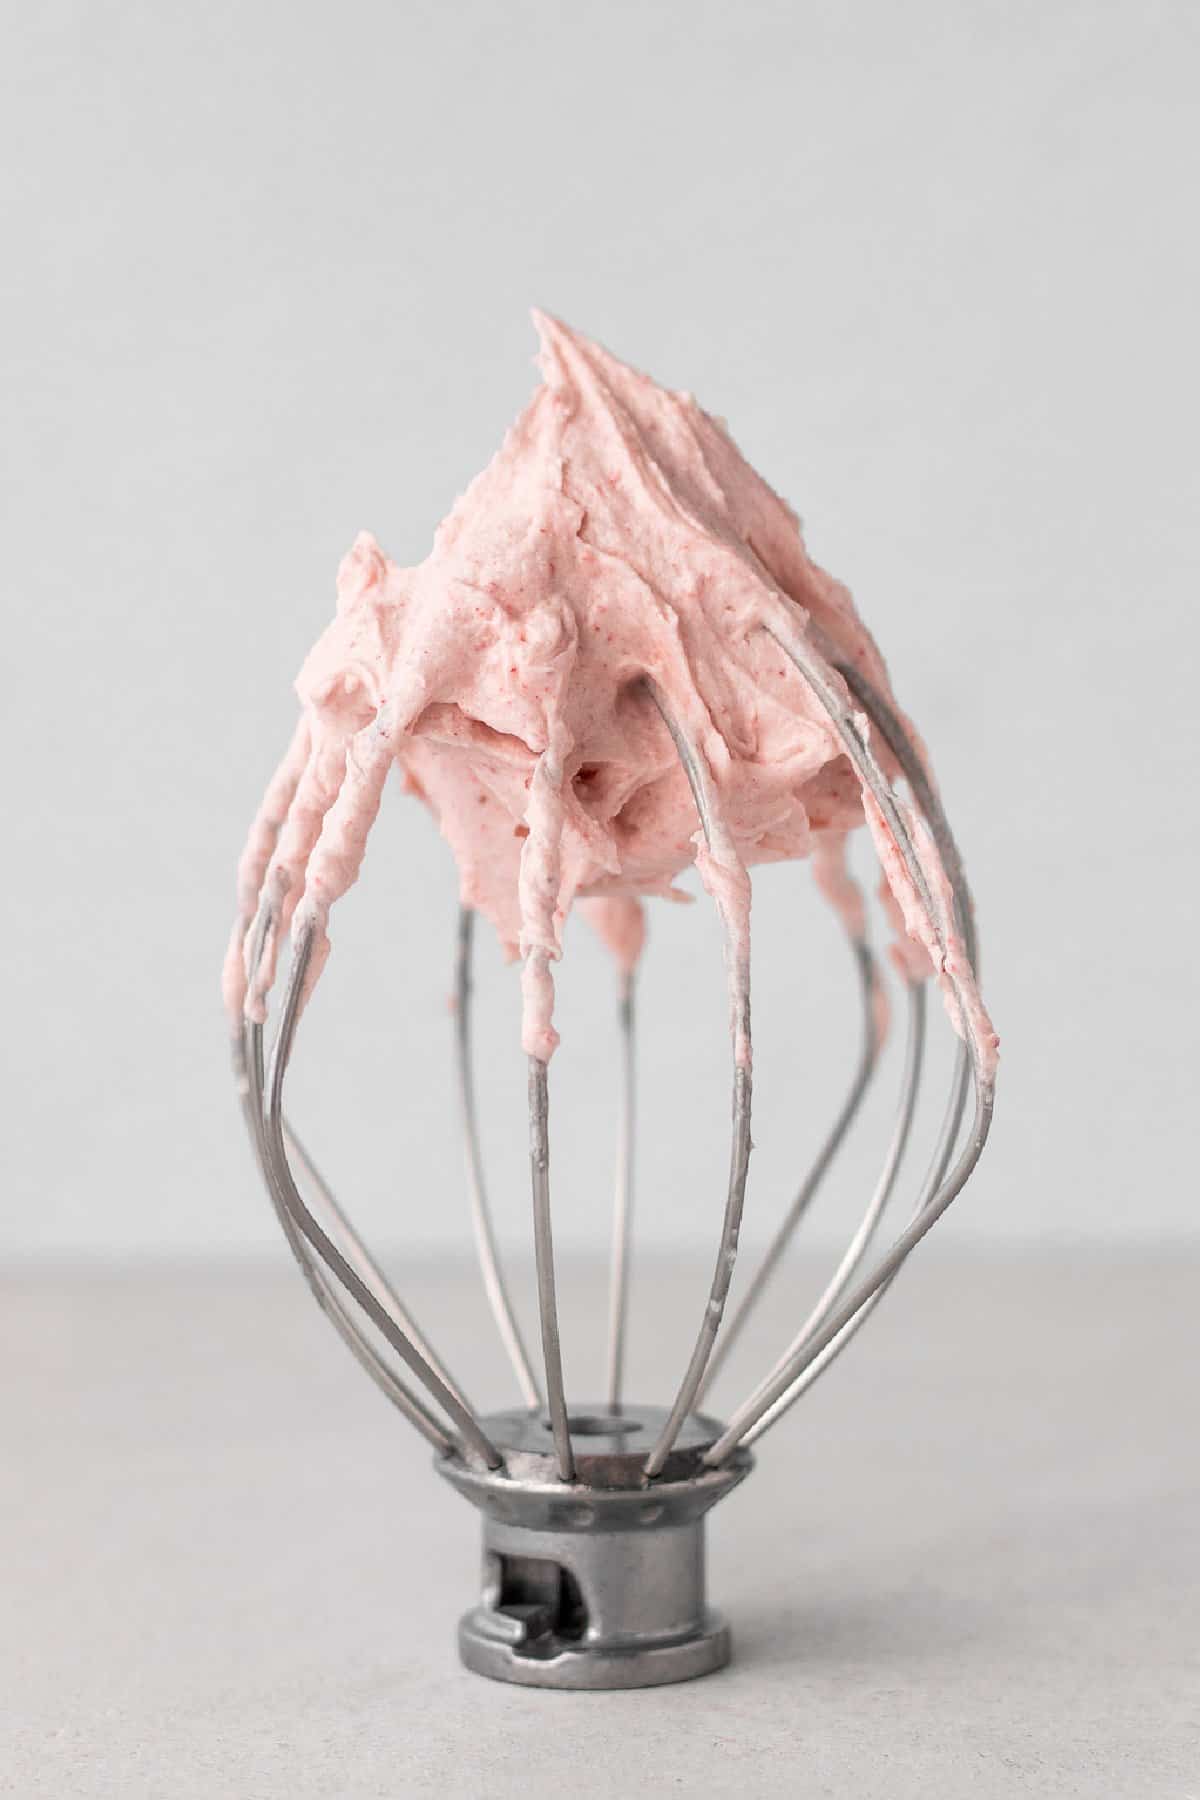 Vegan strawberry frosting on a balloon whisk attachment. 